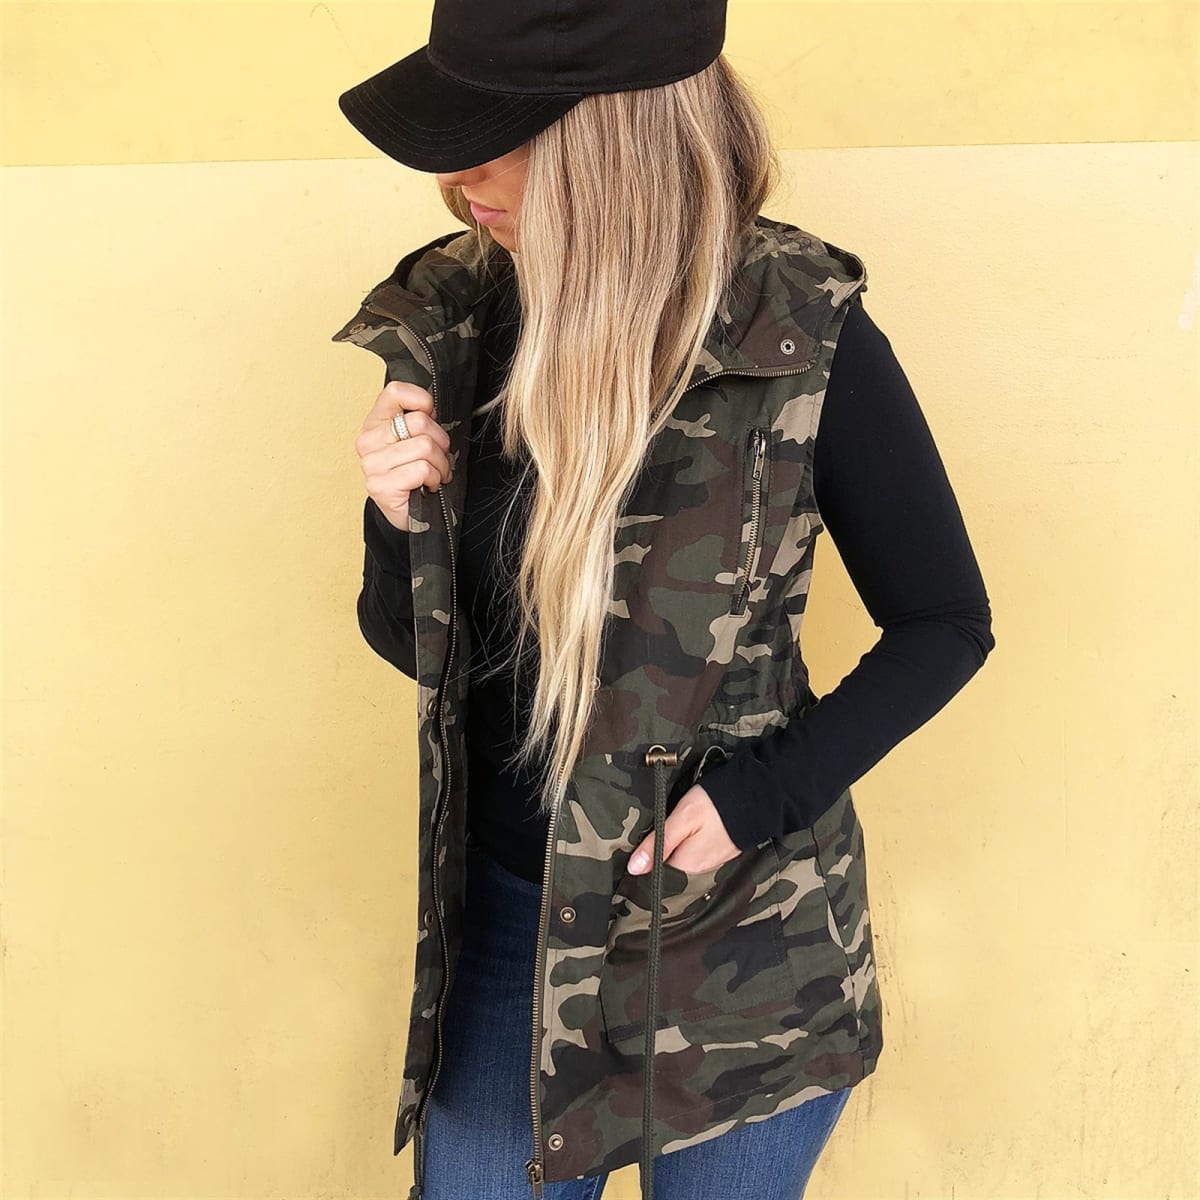 Fall Camo Utility Vest was $44.99, NOW $18.99! - Become a Coupon Queen